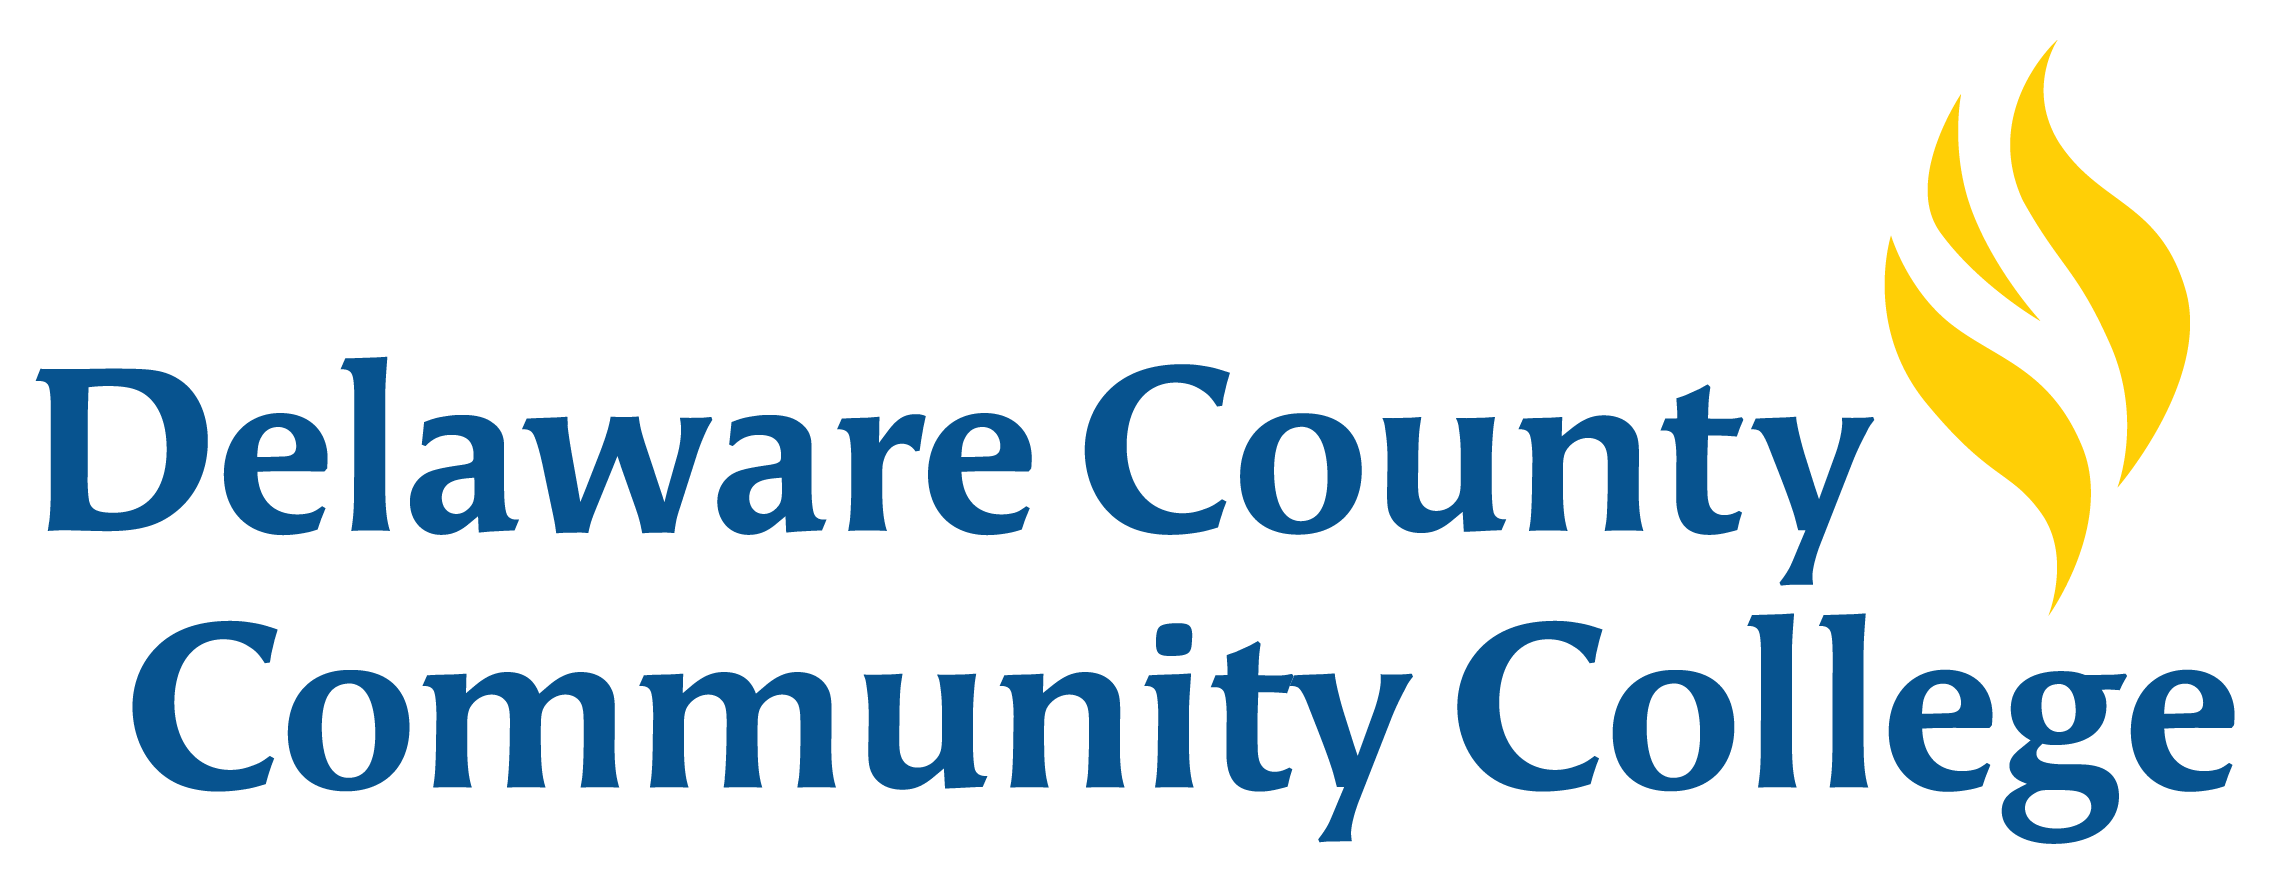 Associate Degree in Accounting | Associate's degree | Business | Blended Learning | 2 years | Delaware County Community College (DCCC) | USA